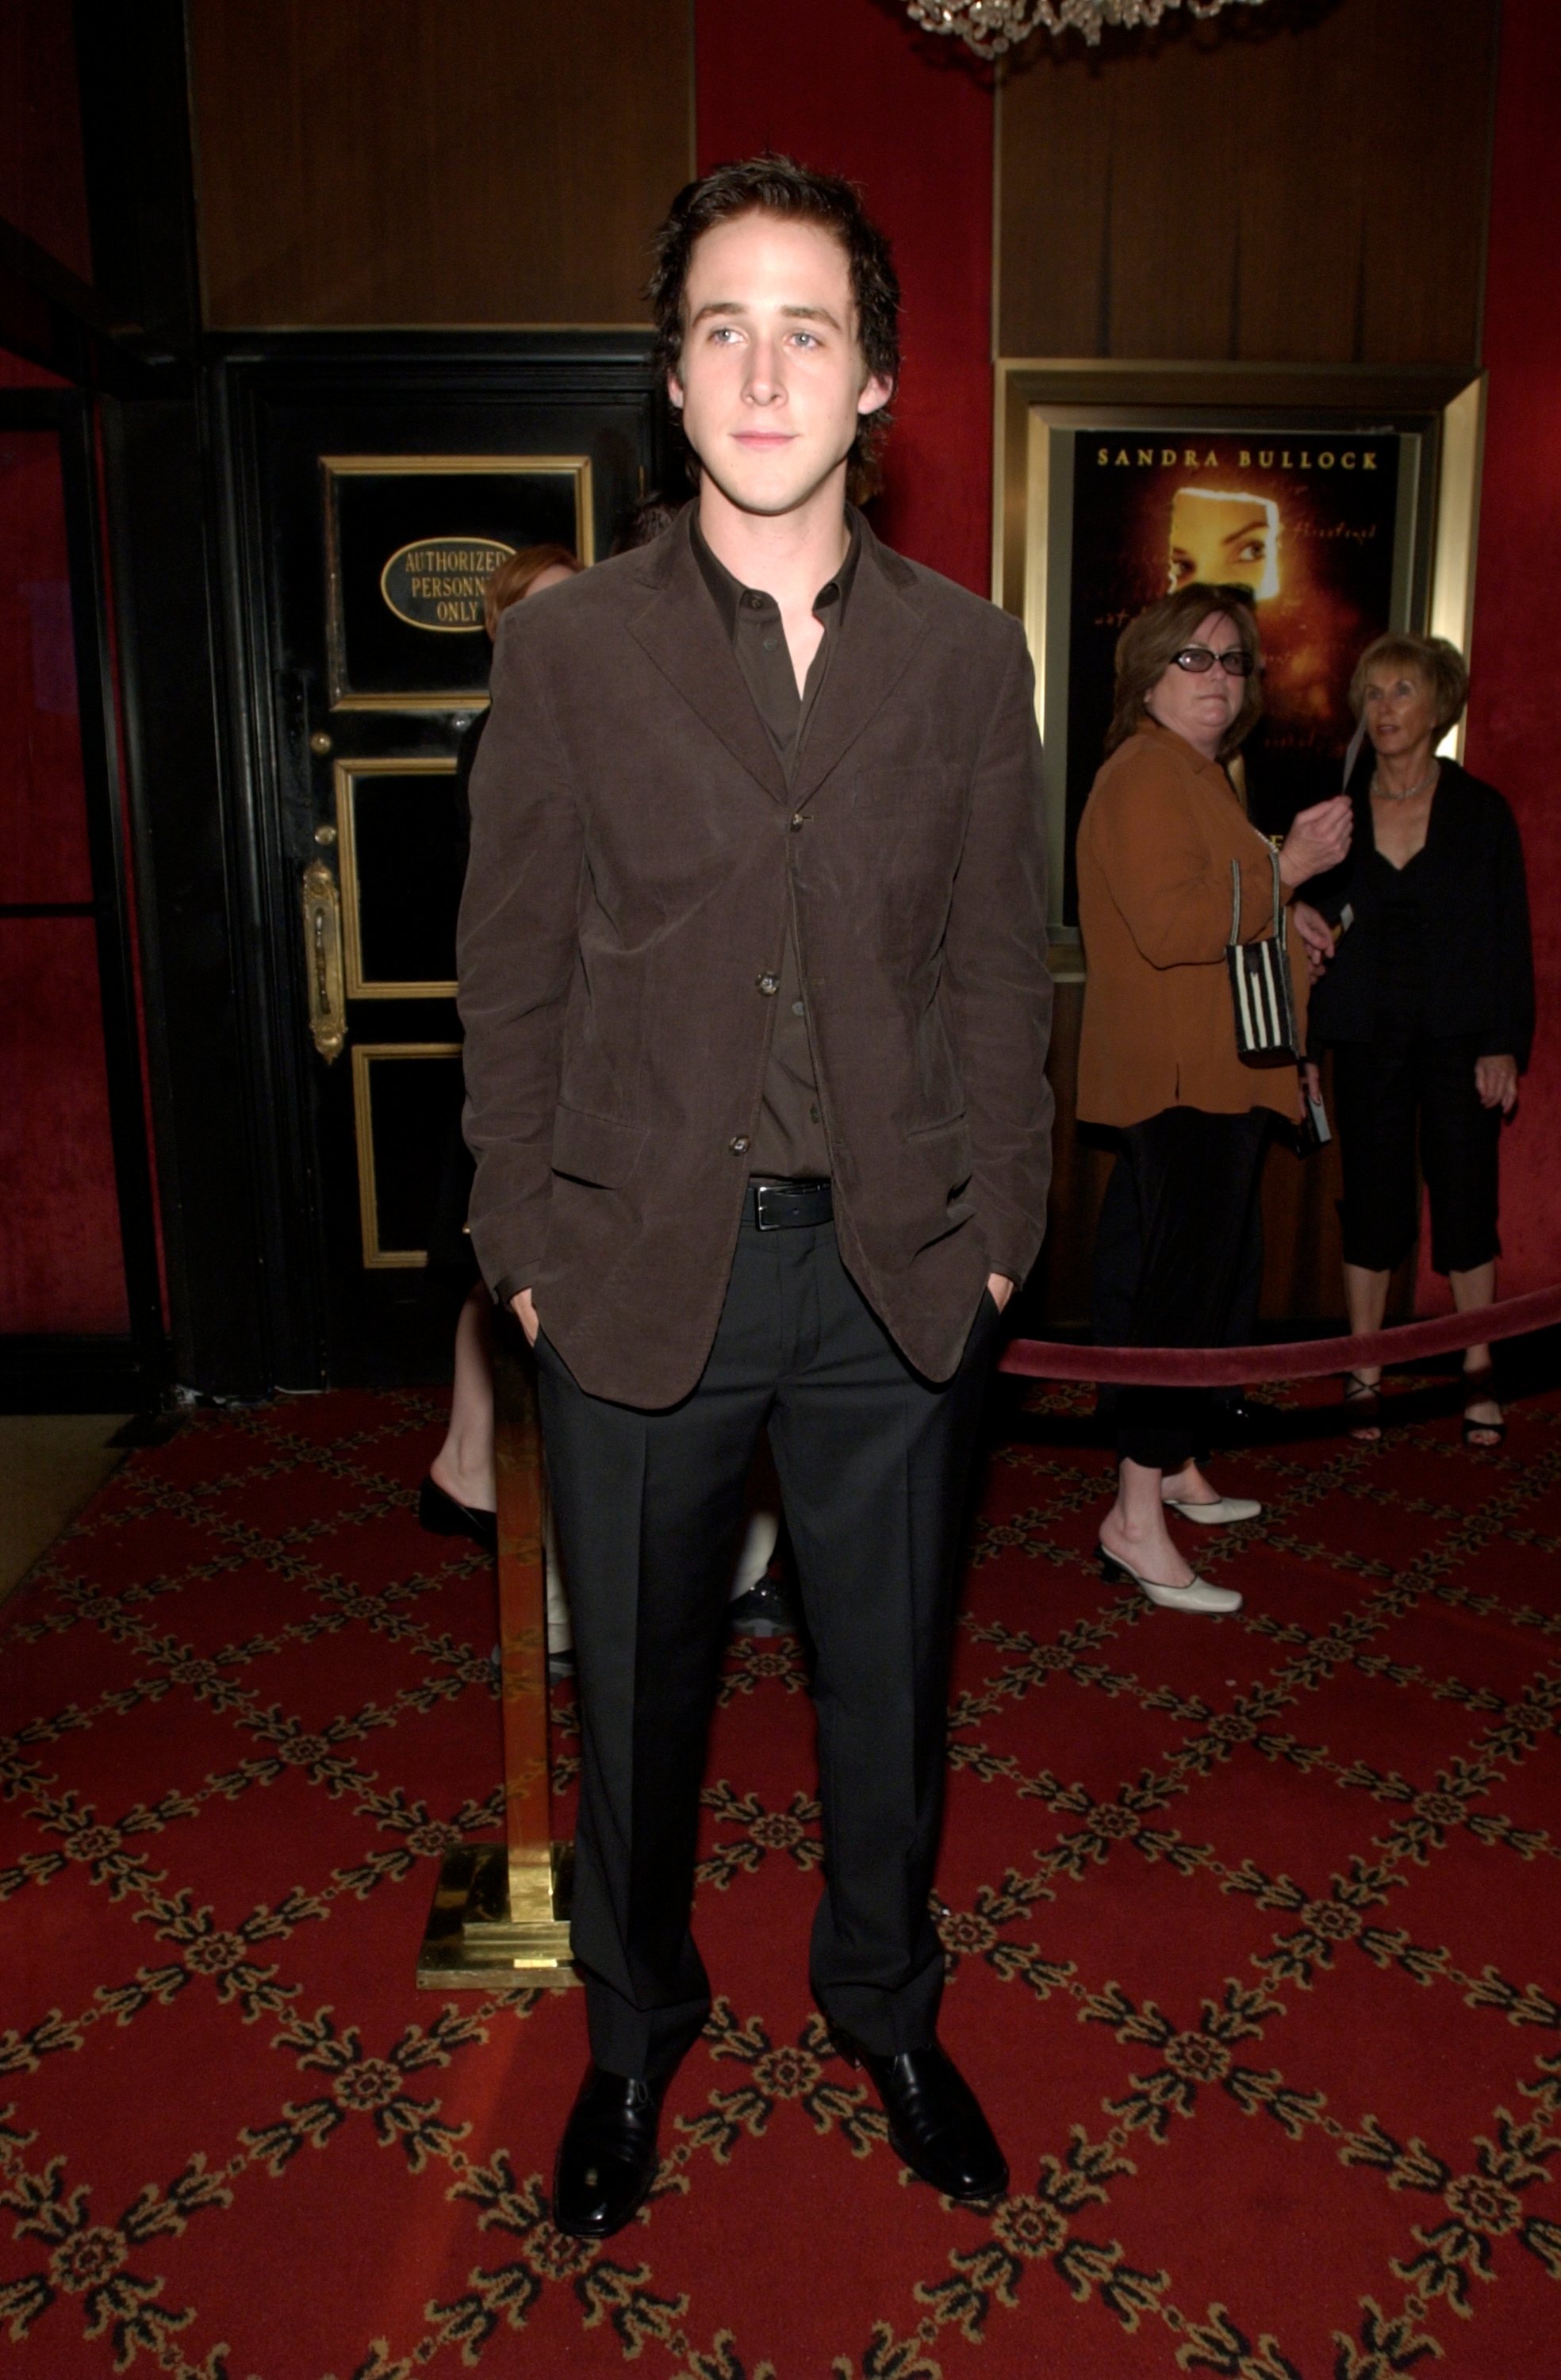 Ryan Gosling at the premiere of "Murder by Numbers" on April 16, 2002, in New York City | Source: Getty Images